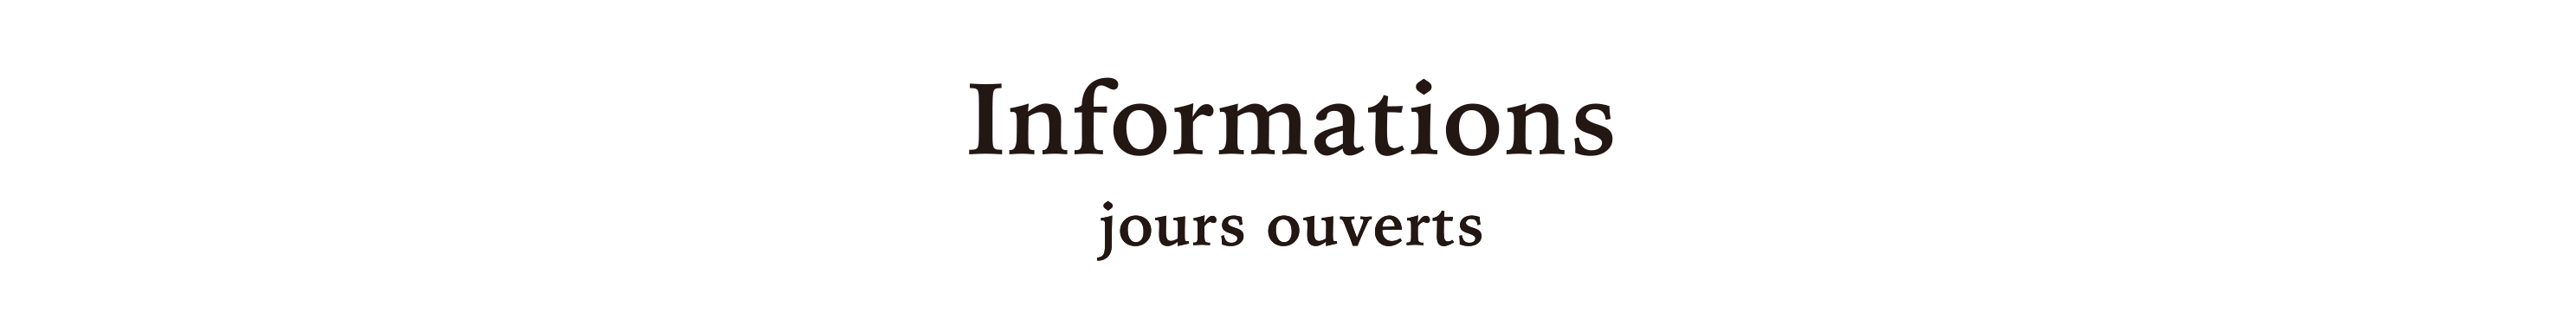 Informations（jours ouverts）